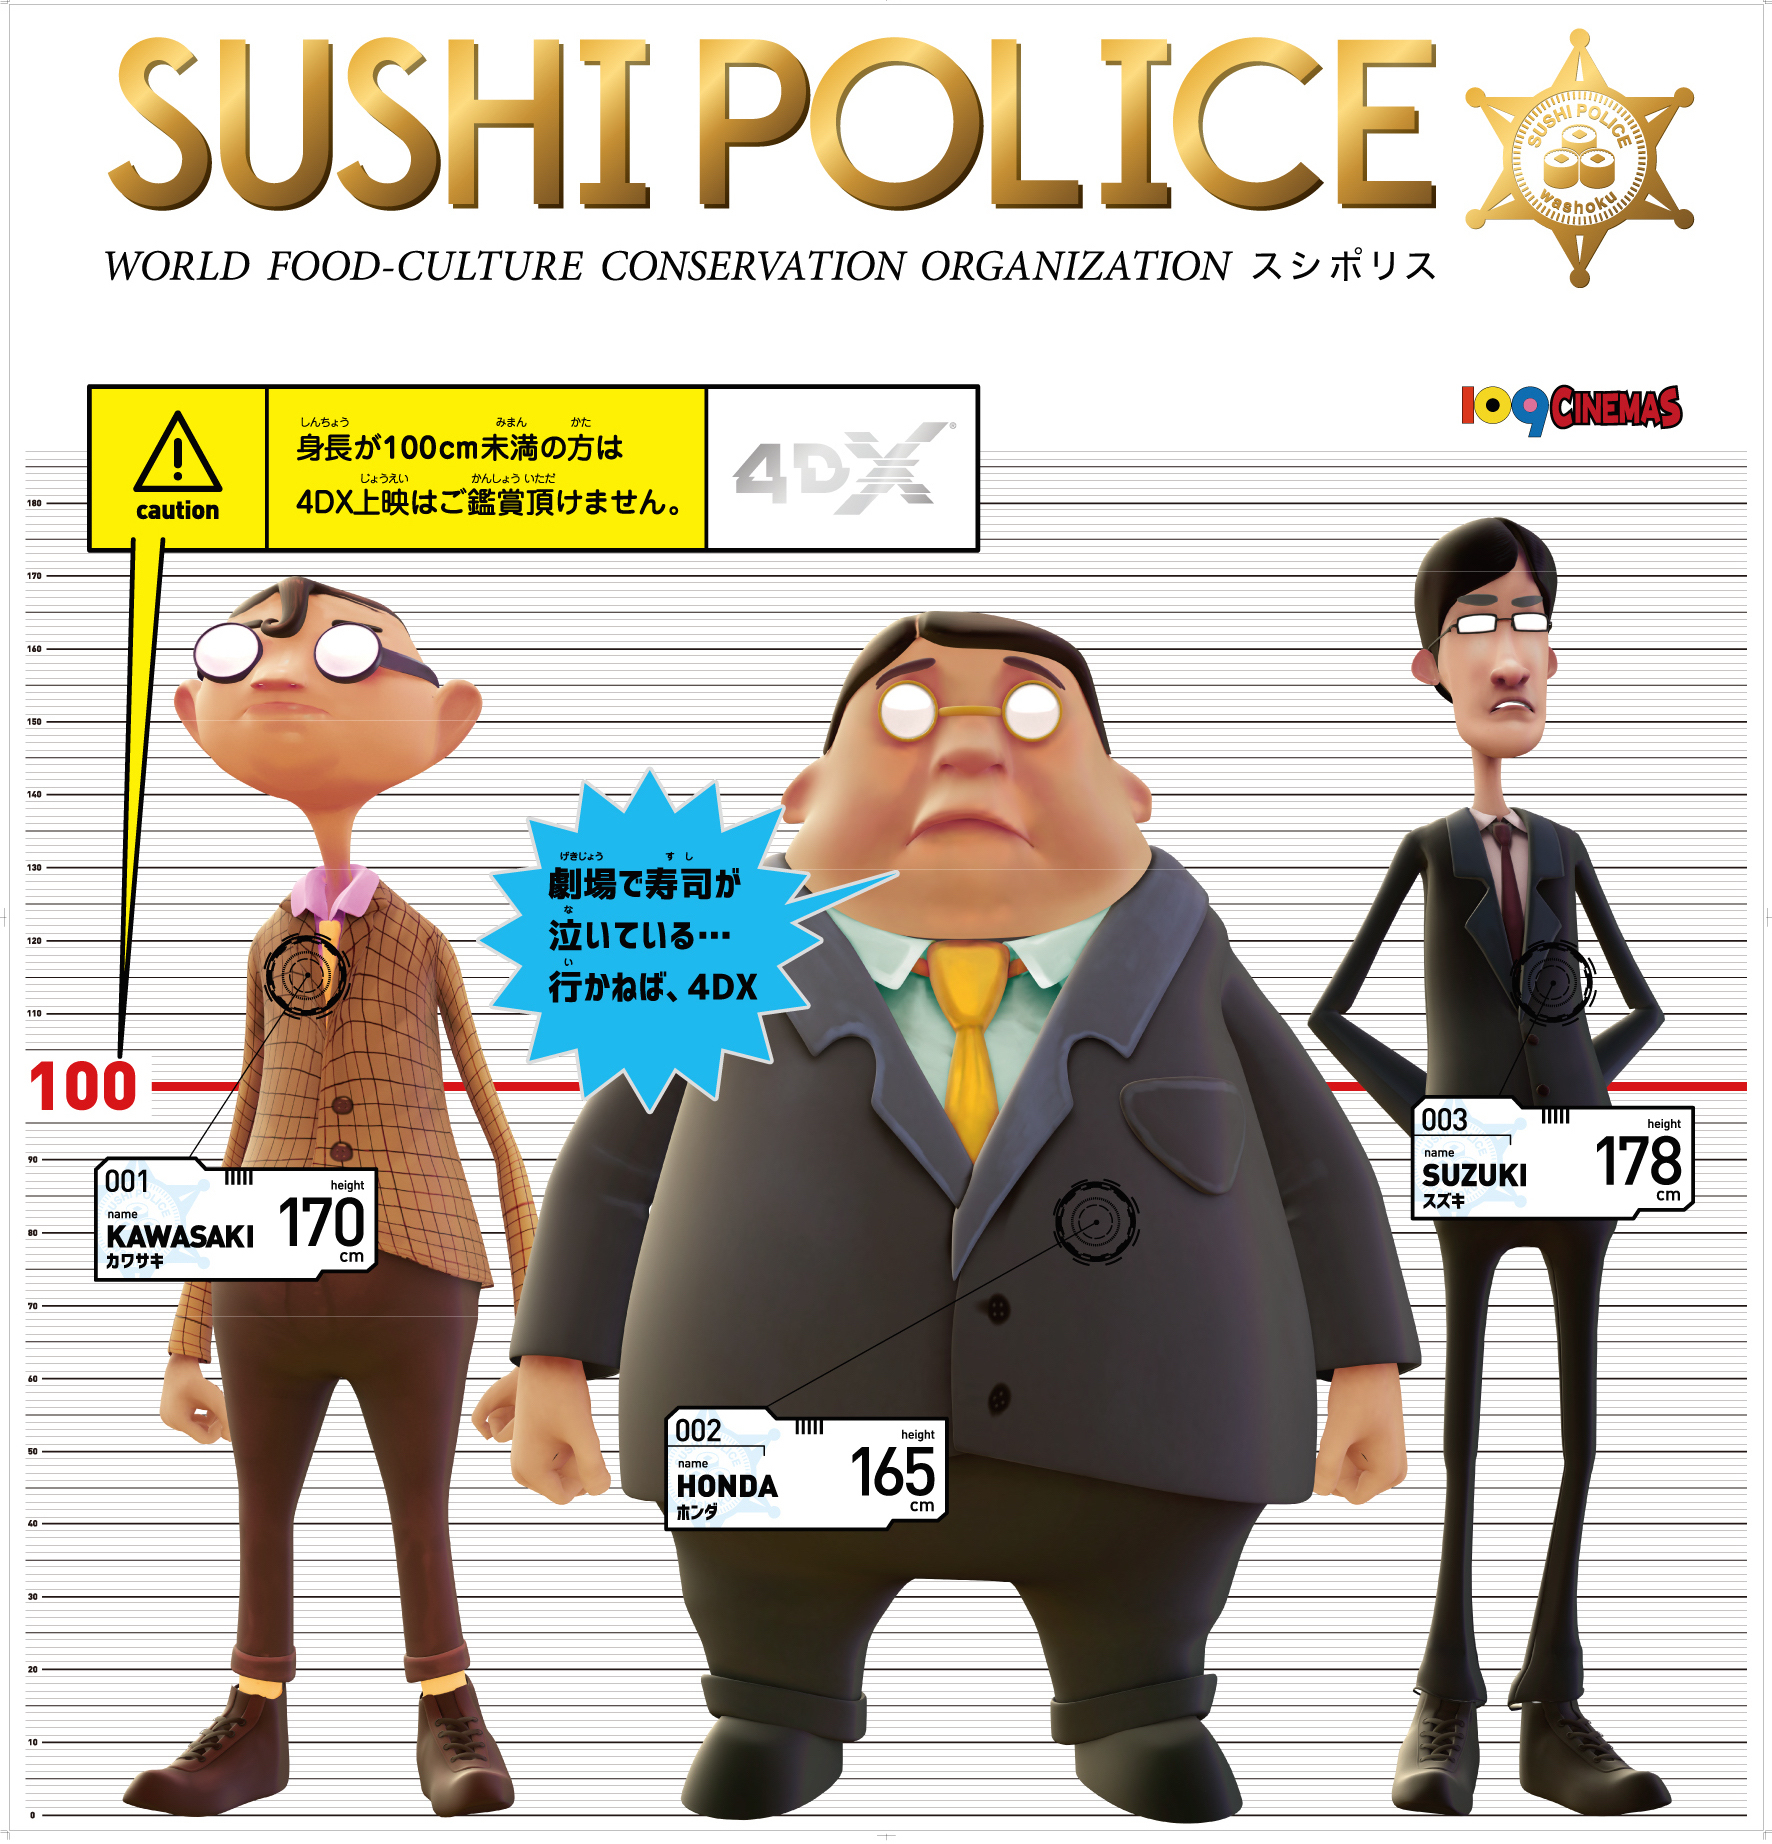 （C） "SUSHI POLICE" Project Partners